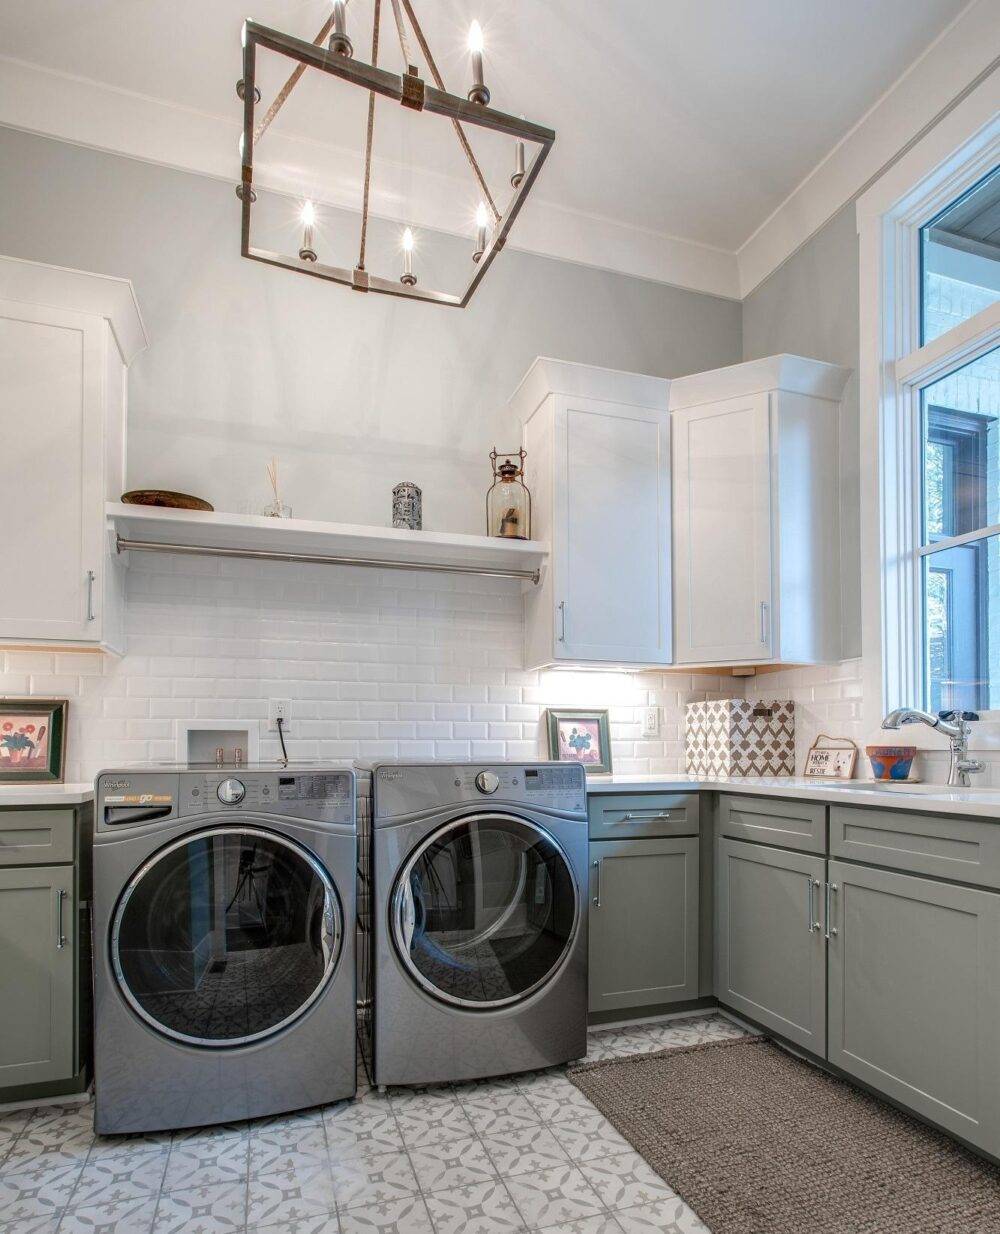 Laundry room featuring beveled subway wall tile and grey patterned floor tile.